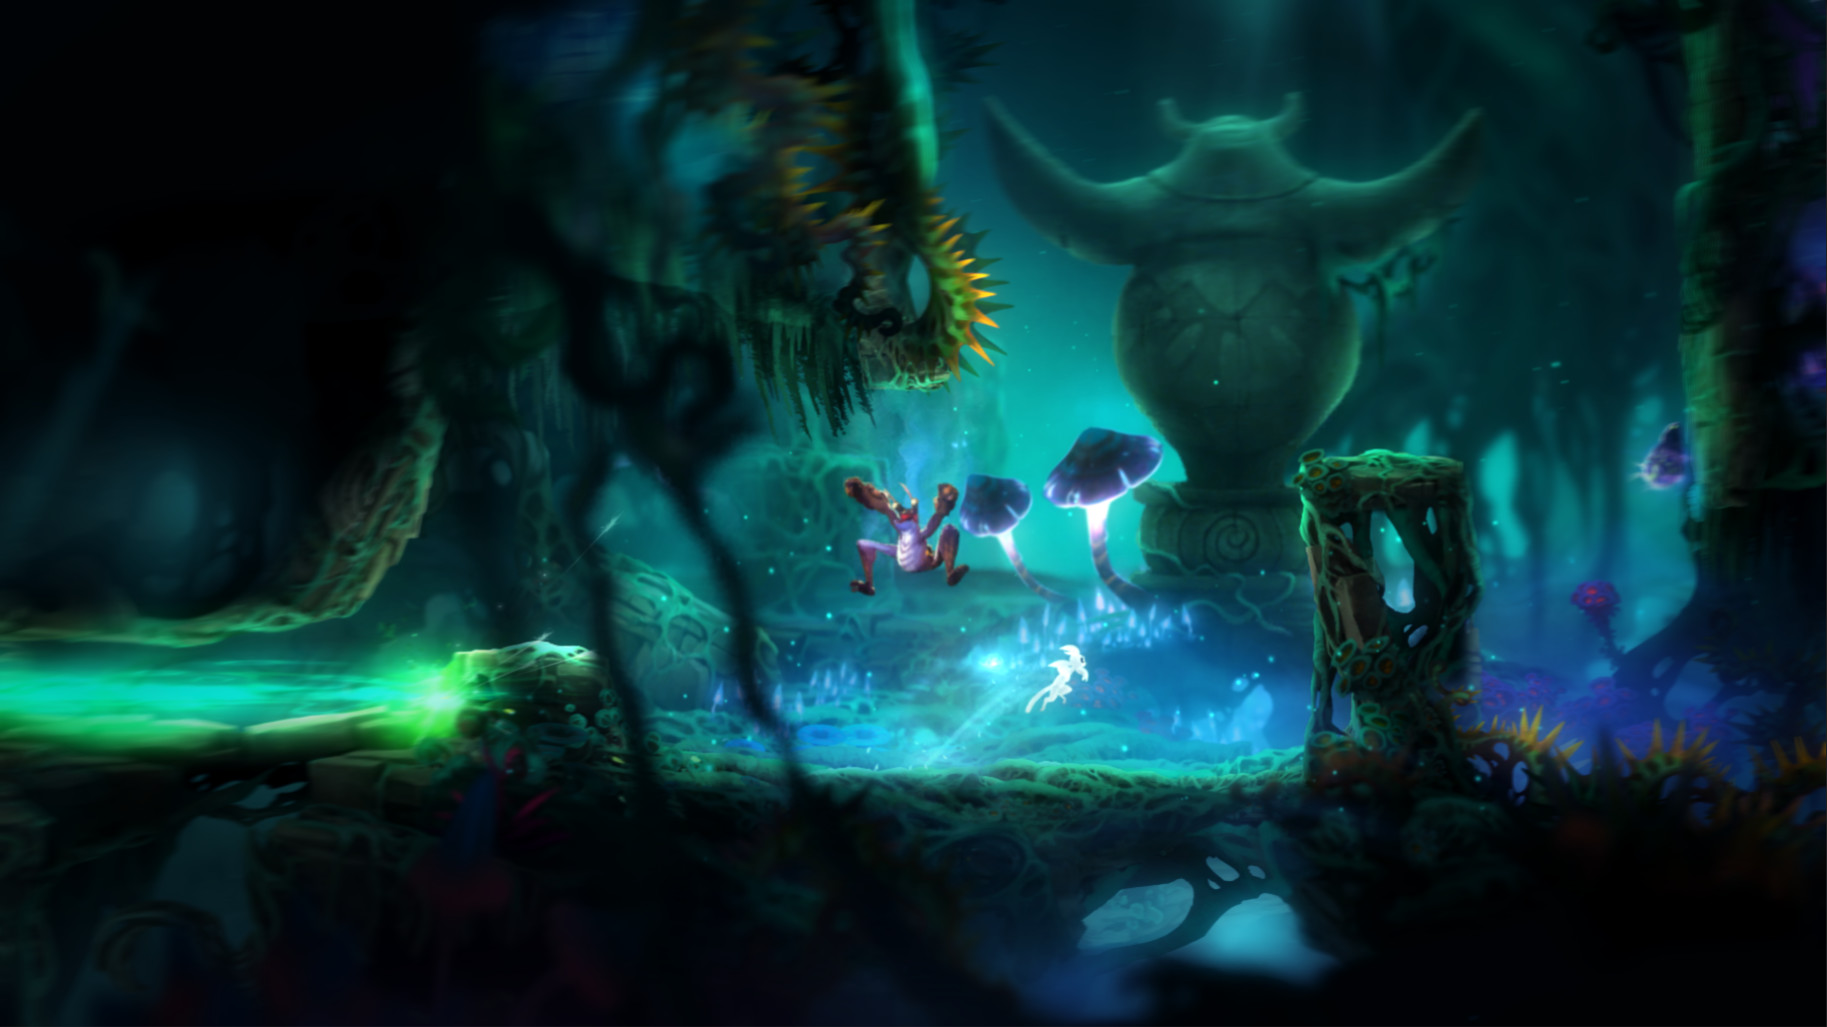 Ori and the Blind Forest: Definitive Edition Review: A Beautiful